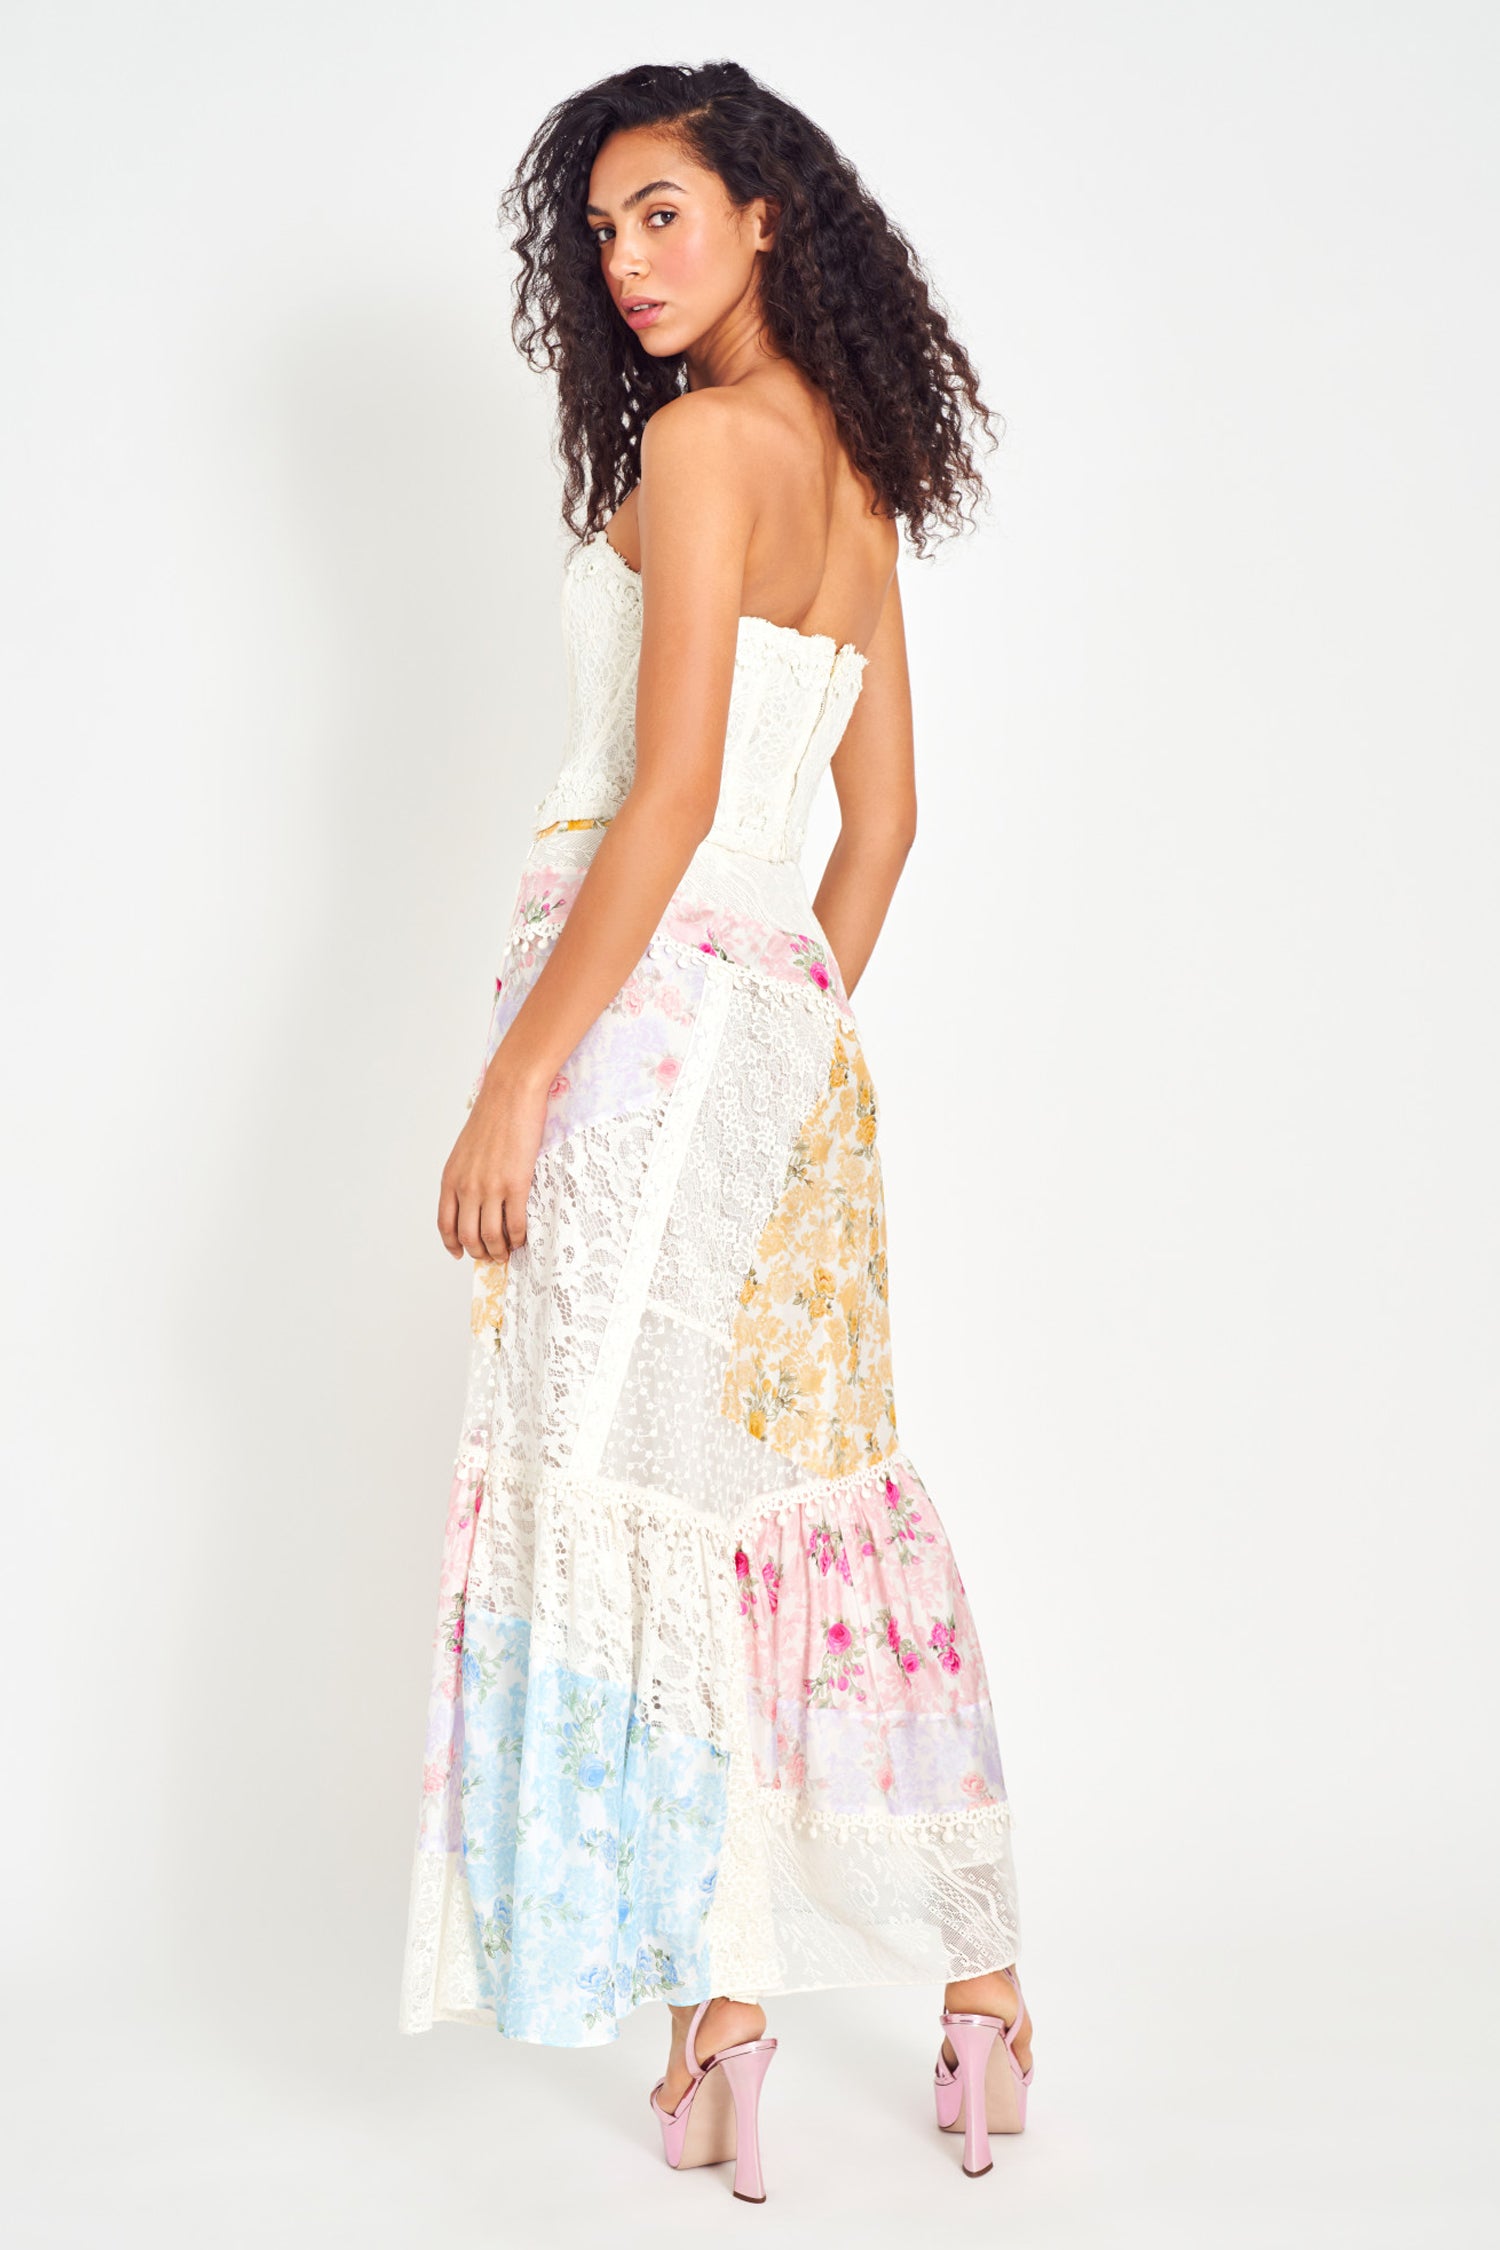 Lace detail contrasting print maxi flounce skirt.